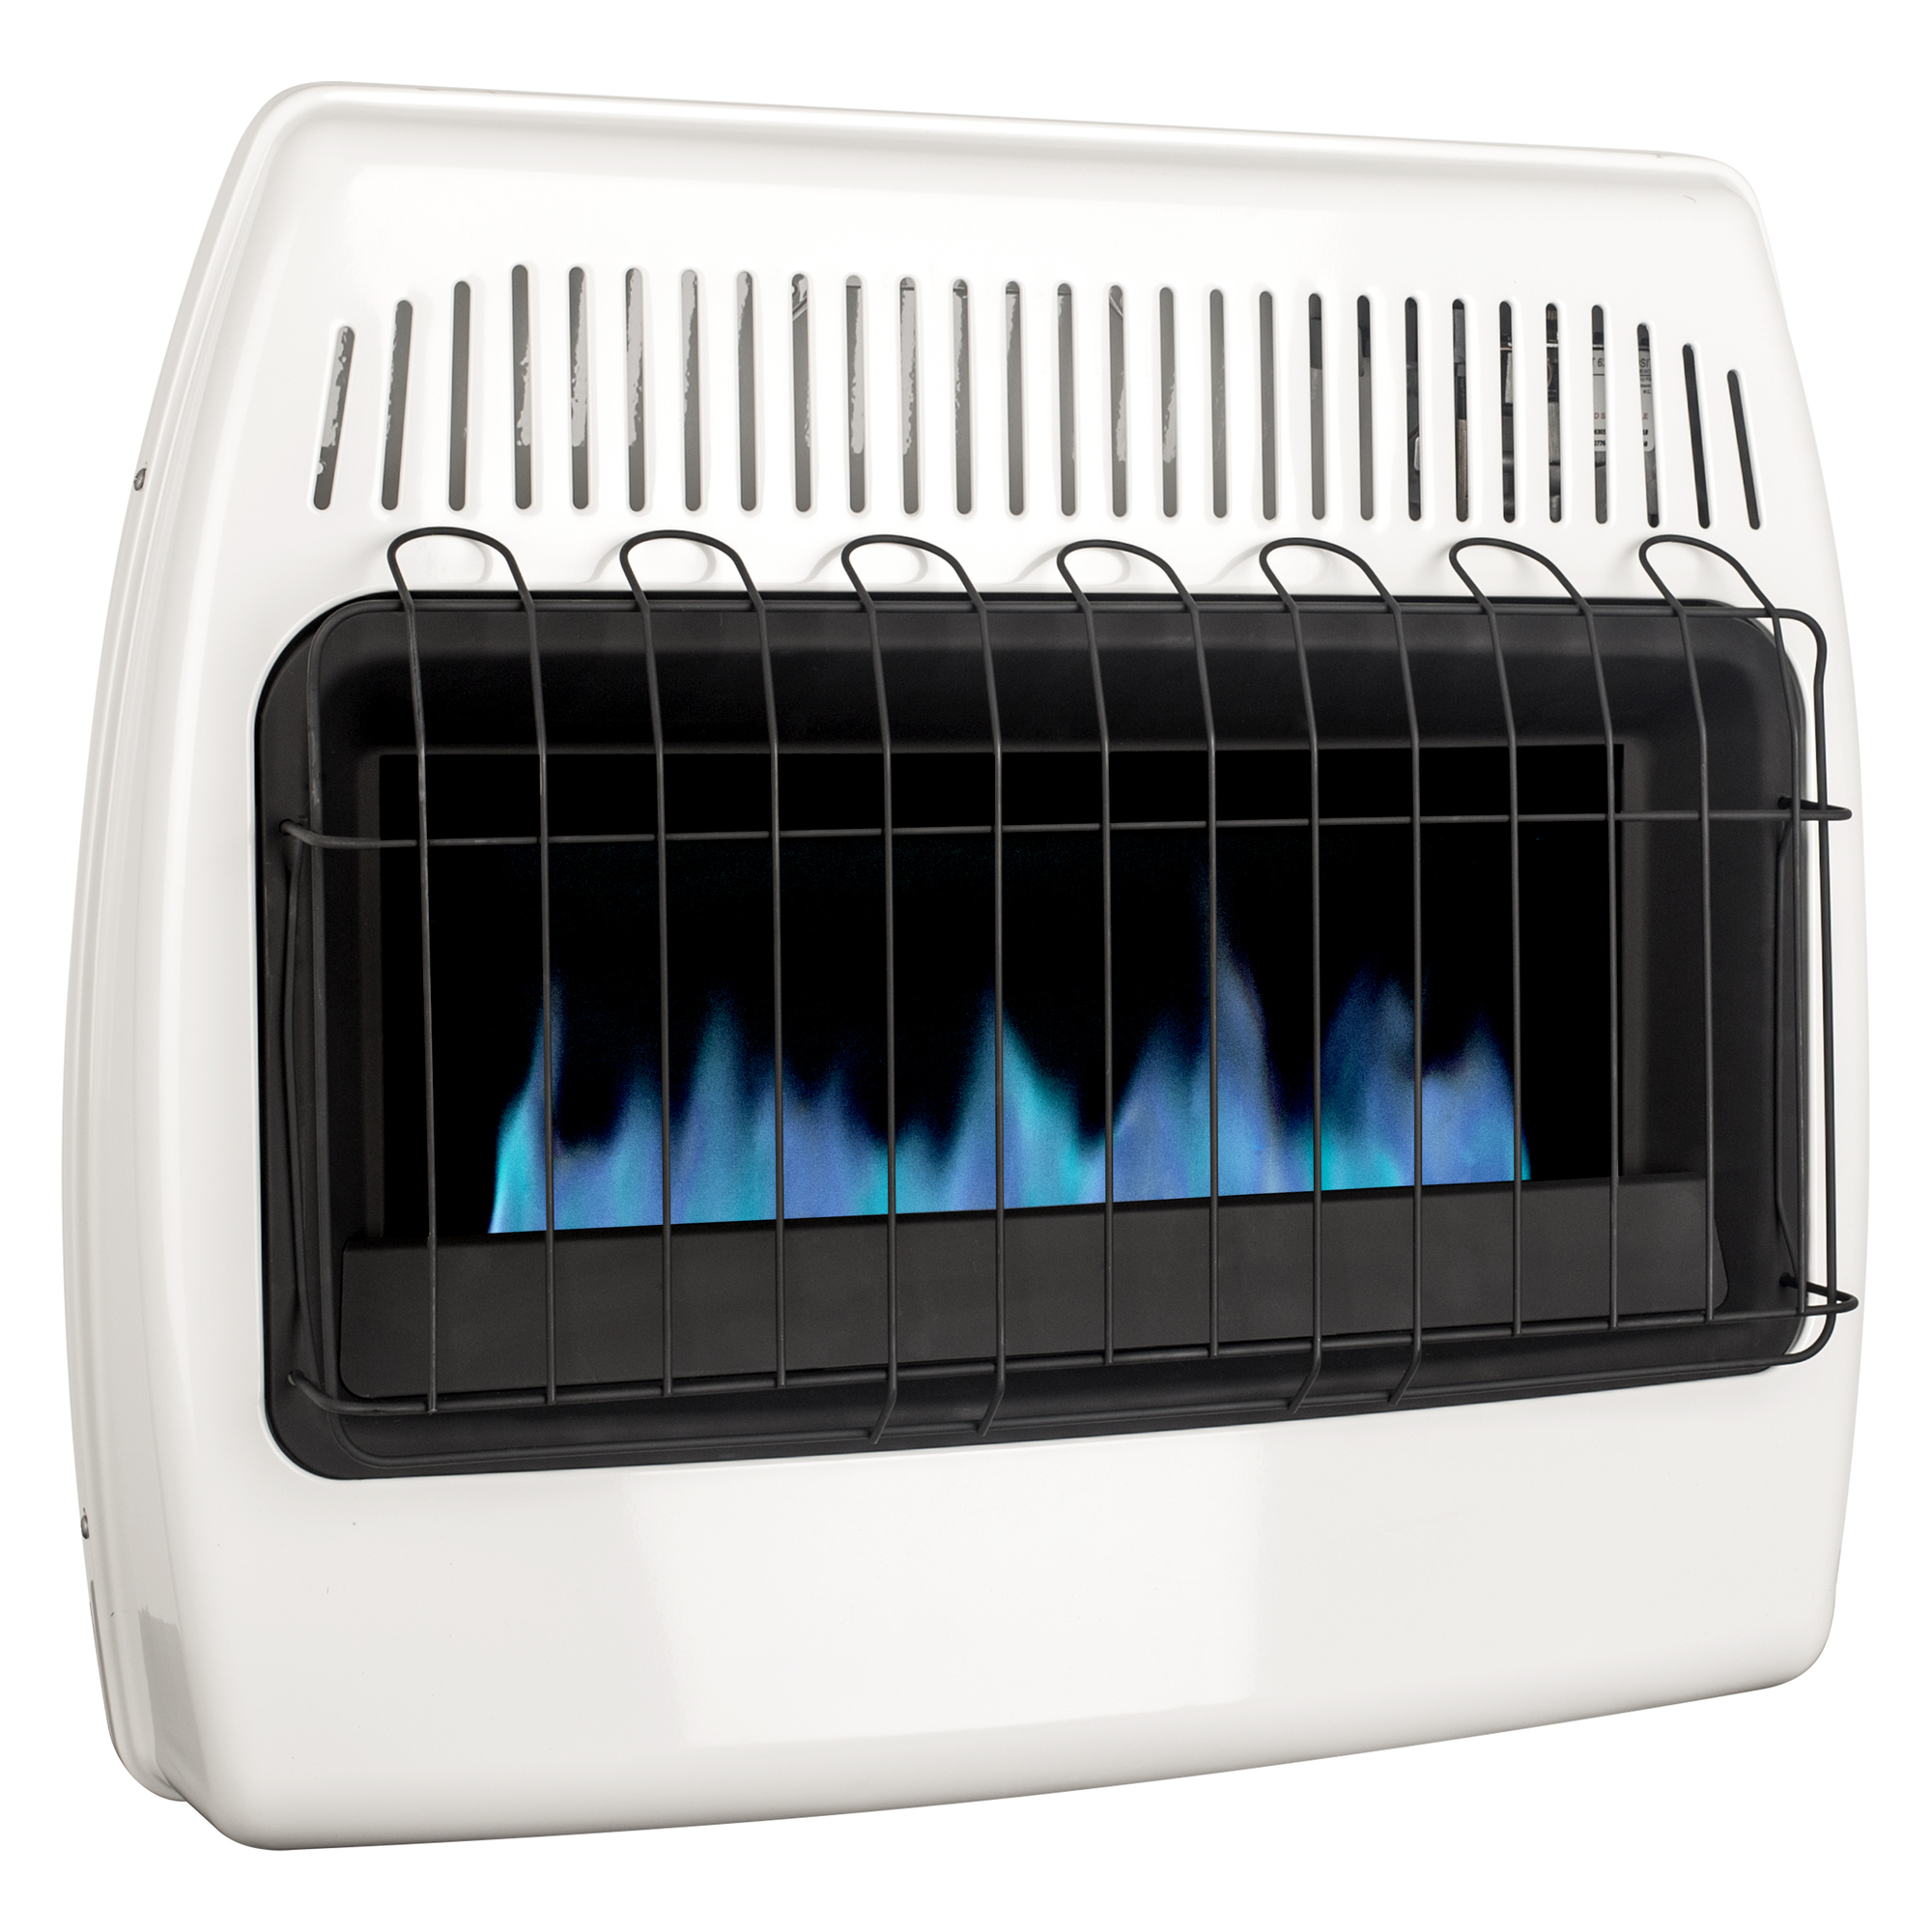 Dyna Glo, 30K BTU NG Blue Flame Vent Free Wall Heater, Heat Output 30000 Btu/hour, Heating Capability 1000 ftÂ², Fuel Type Natural Gas, Model BF30NMDG